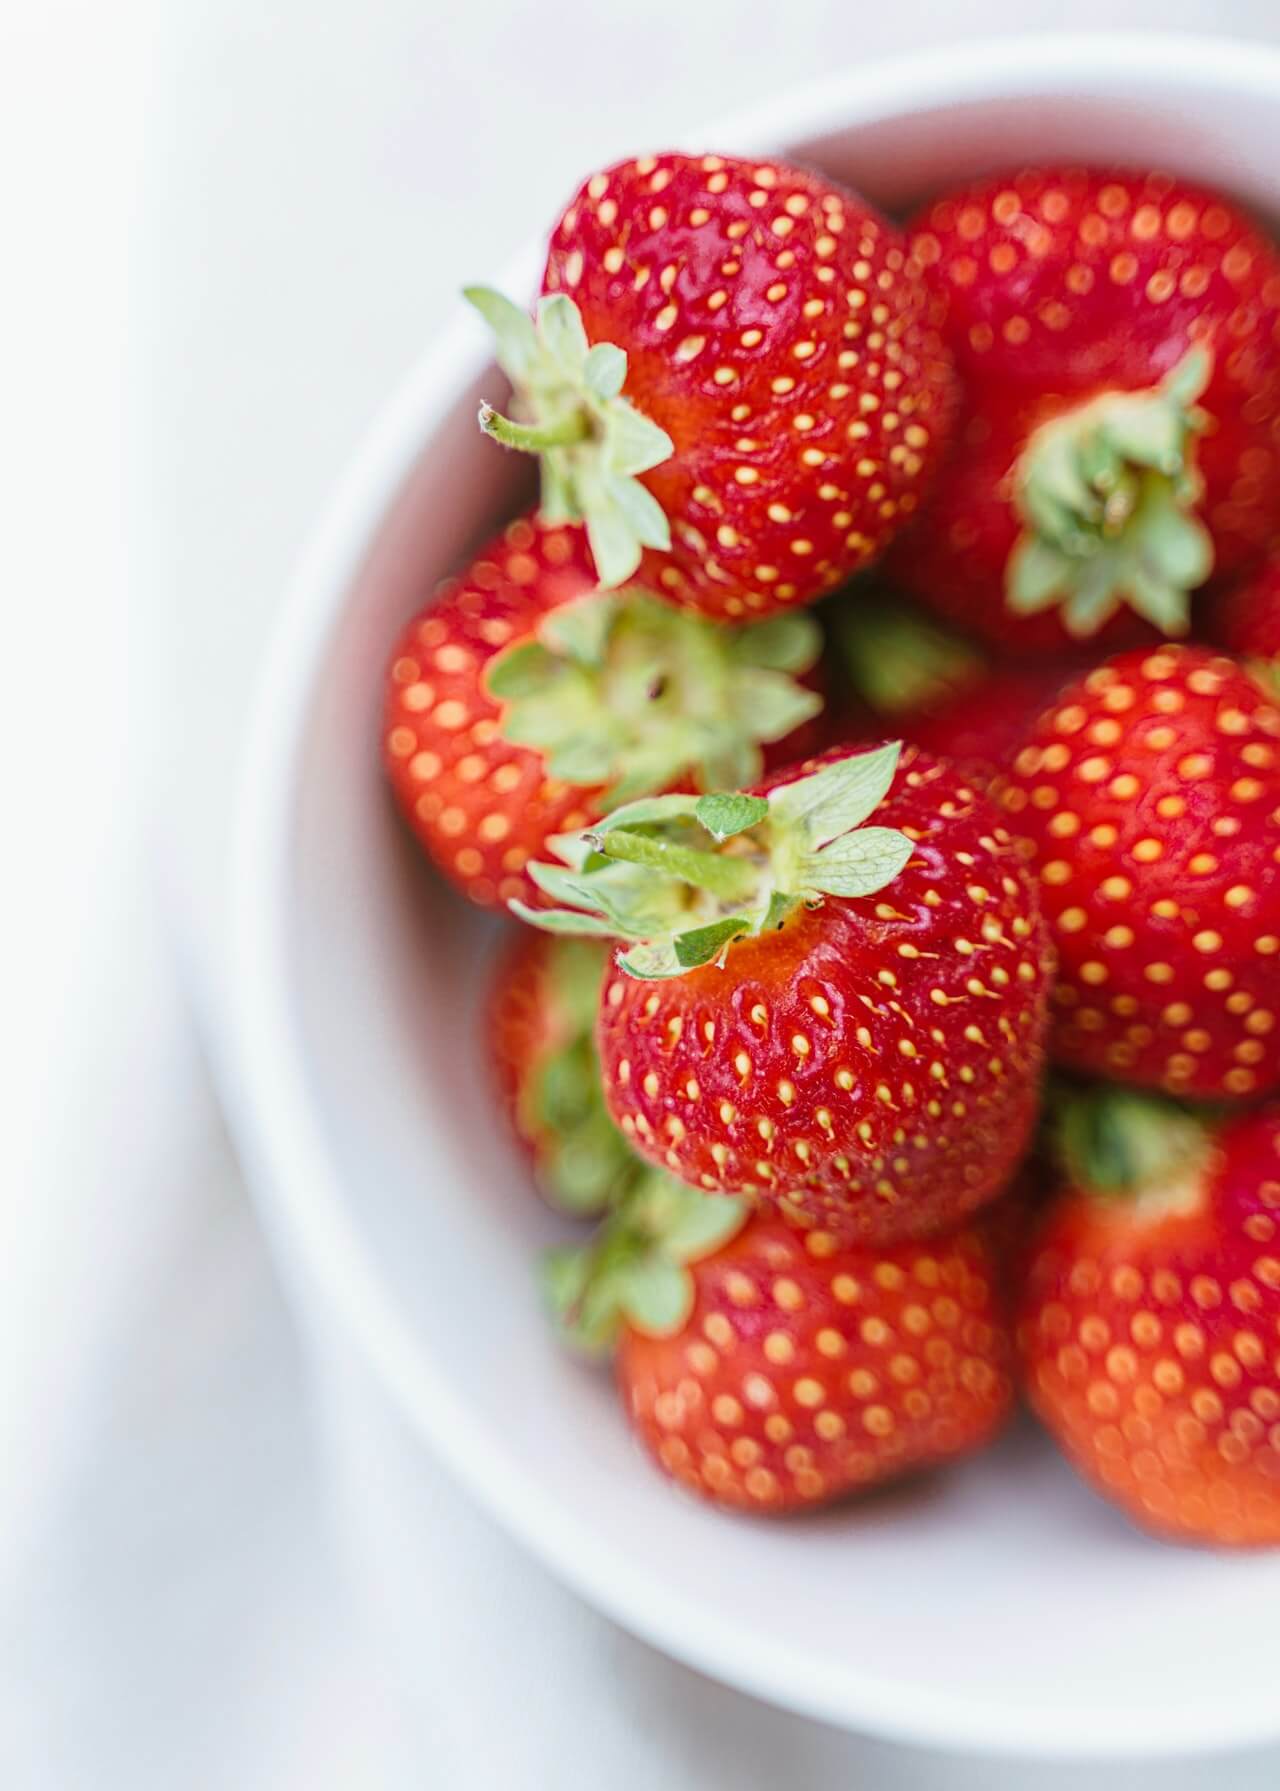 Homemade cosmetics from strawberries – how to make them?